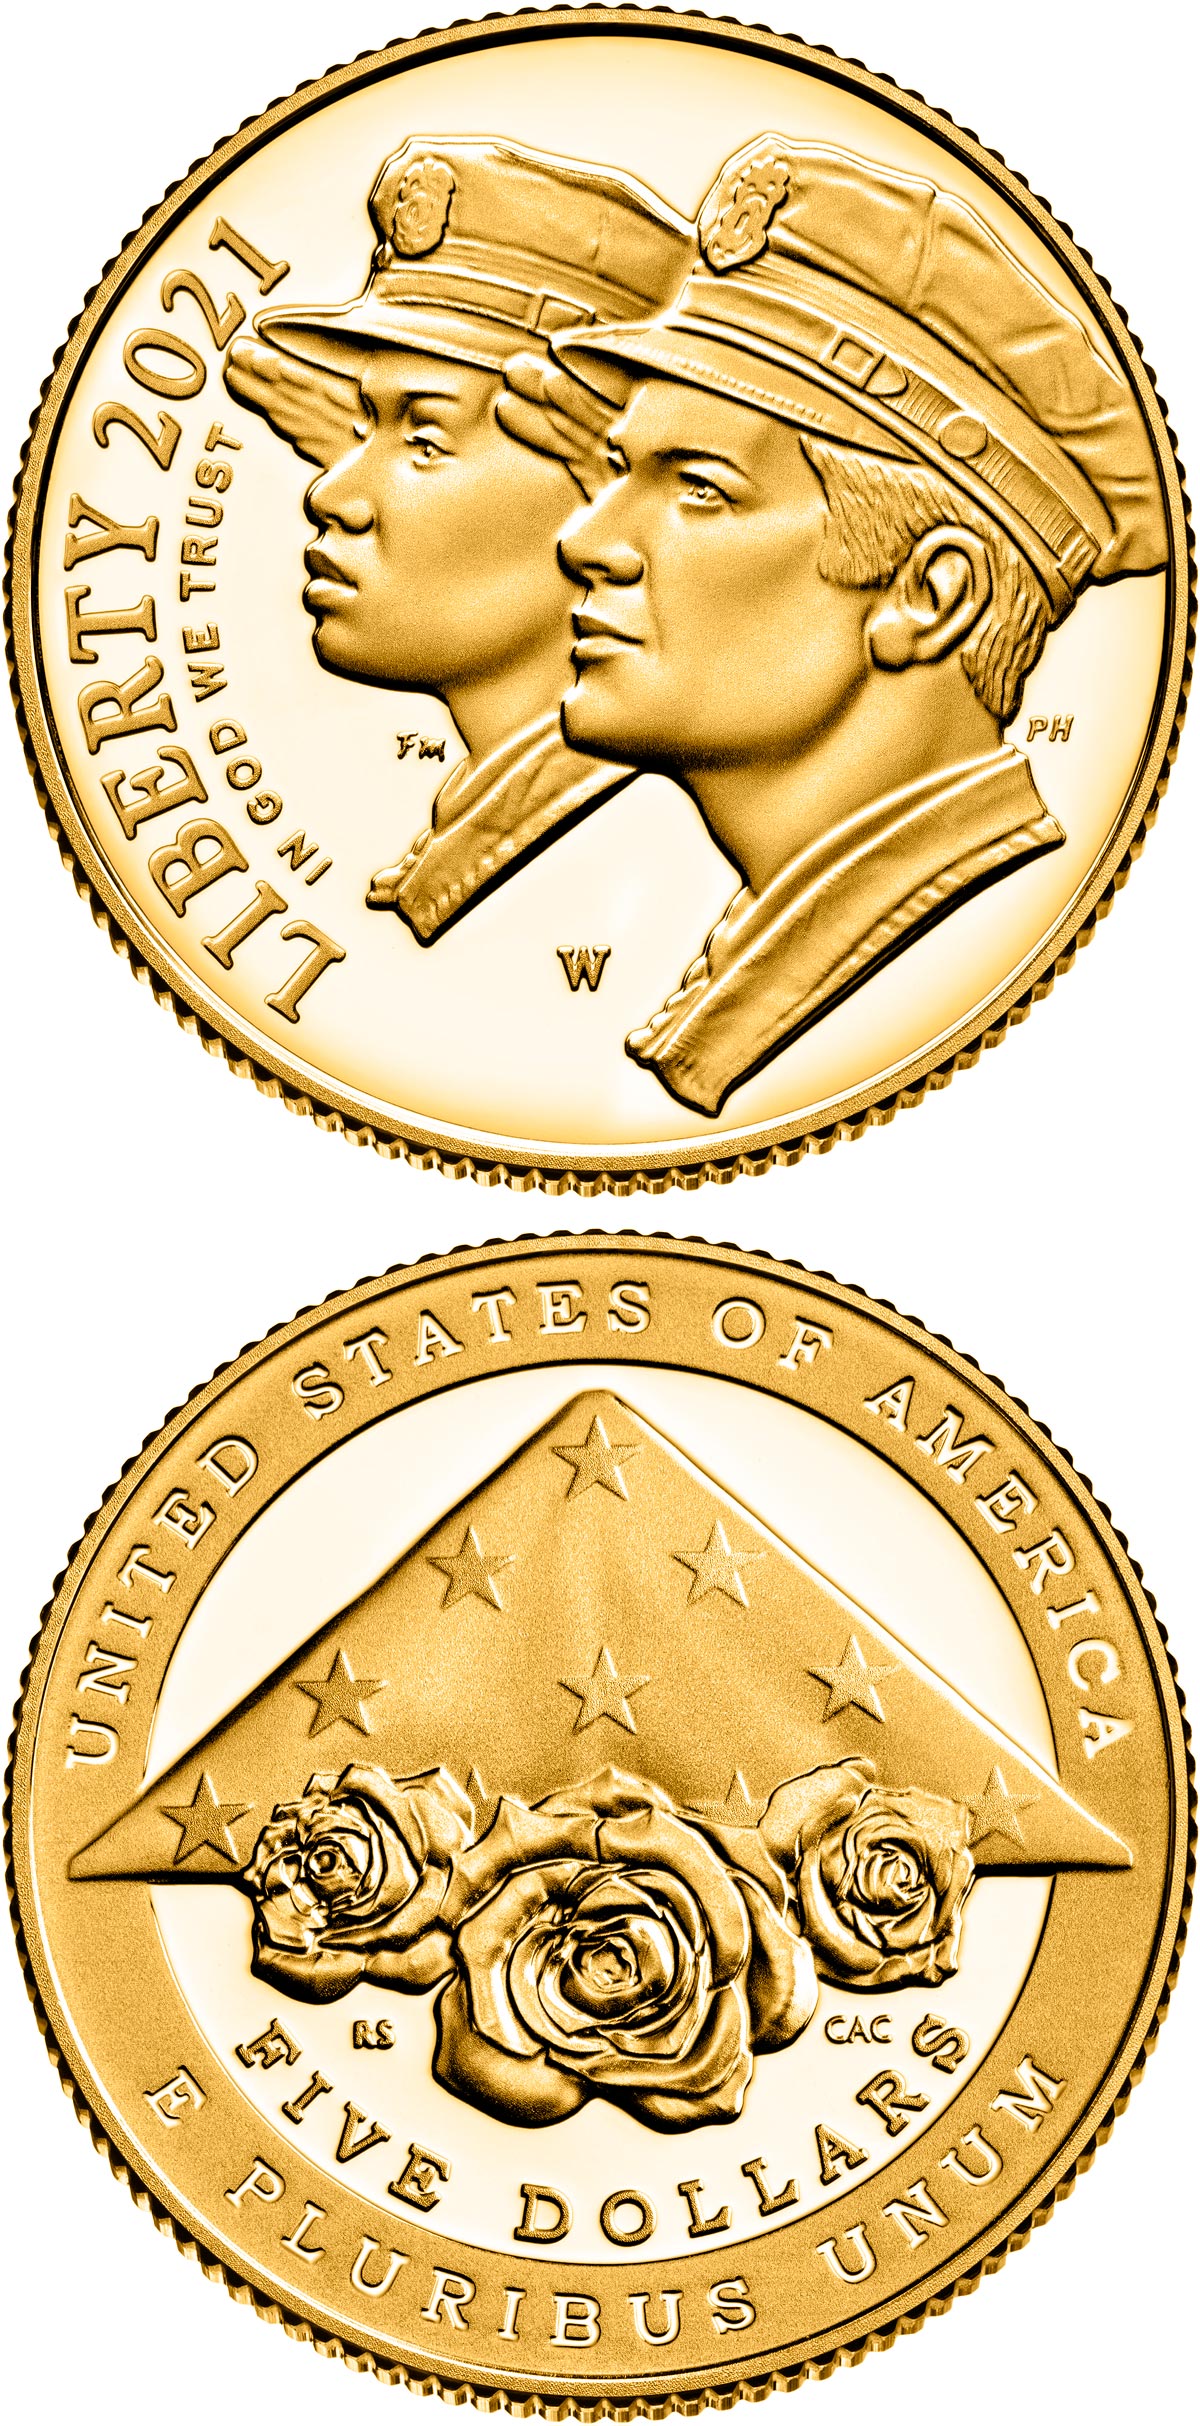 Image of 5 dollars coin - National Law Enforcement Memorial and Museum | USA 2021.  The Gold coin is of Proof, BU quality.